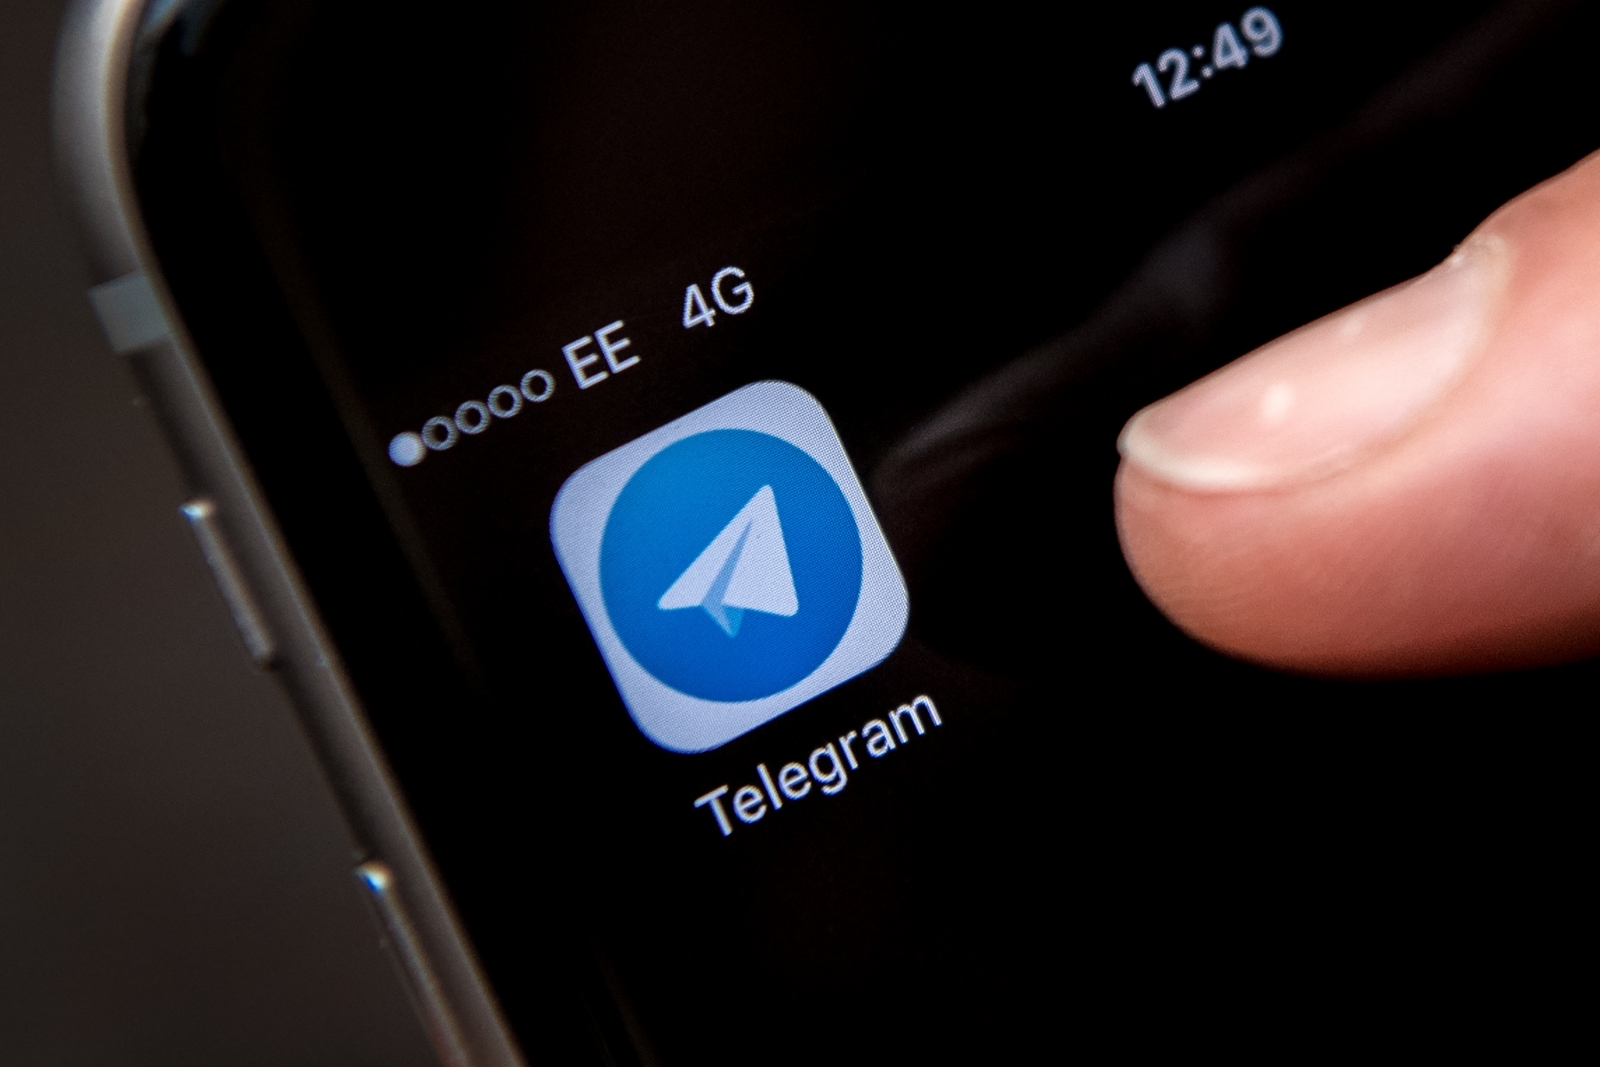 What is Teligram? Fake Telegram app found serving up malware and ads on Google Play Store